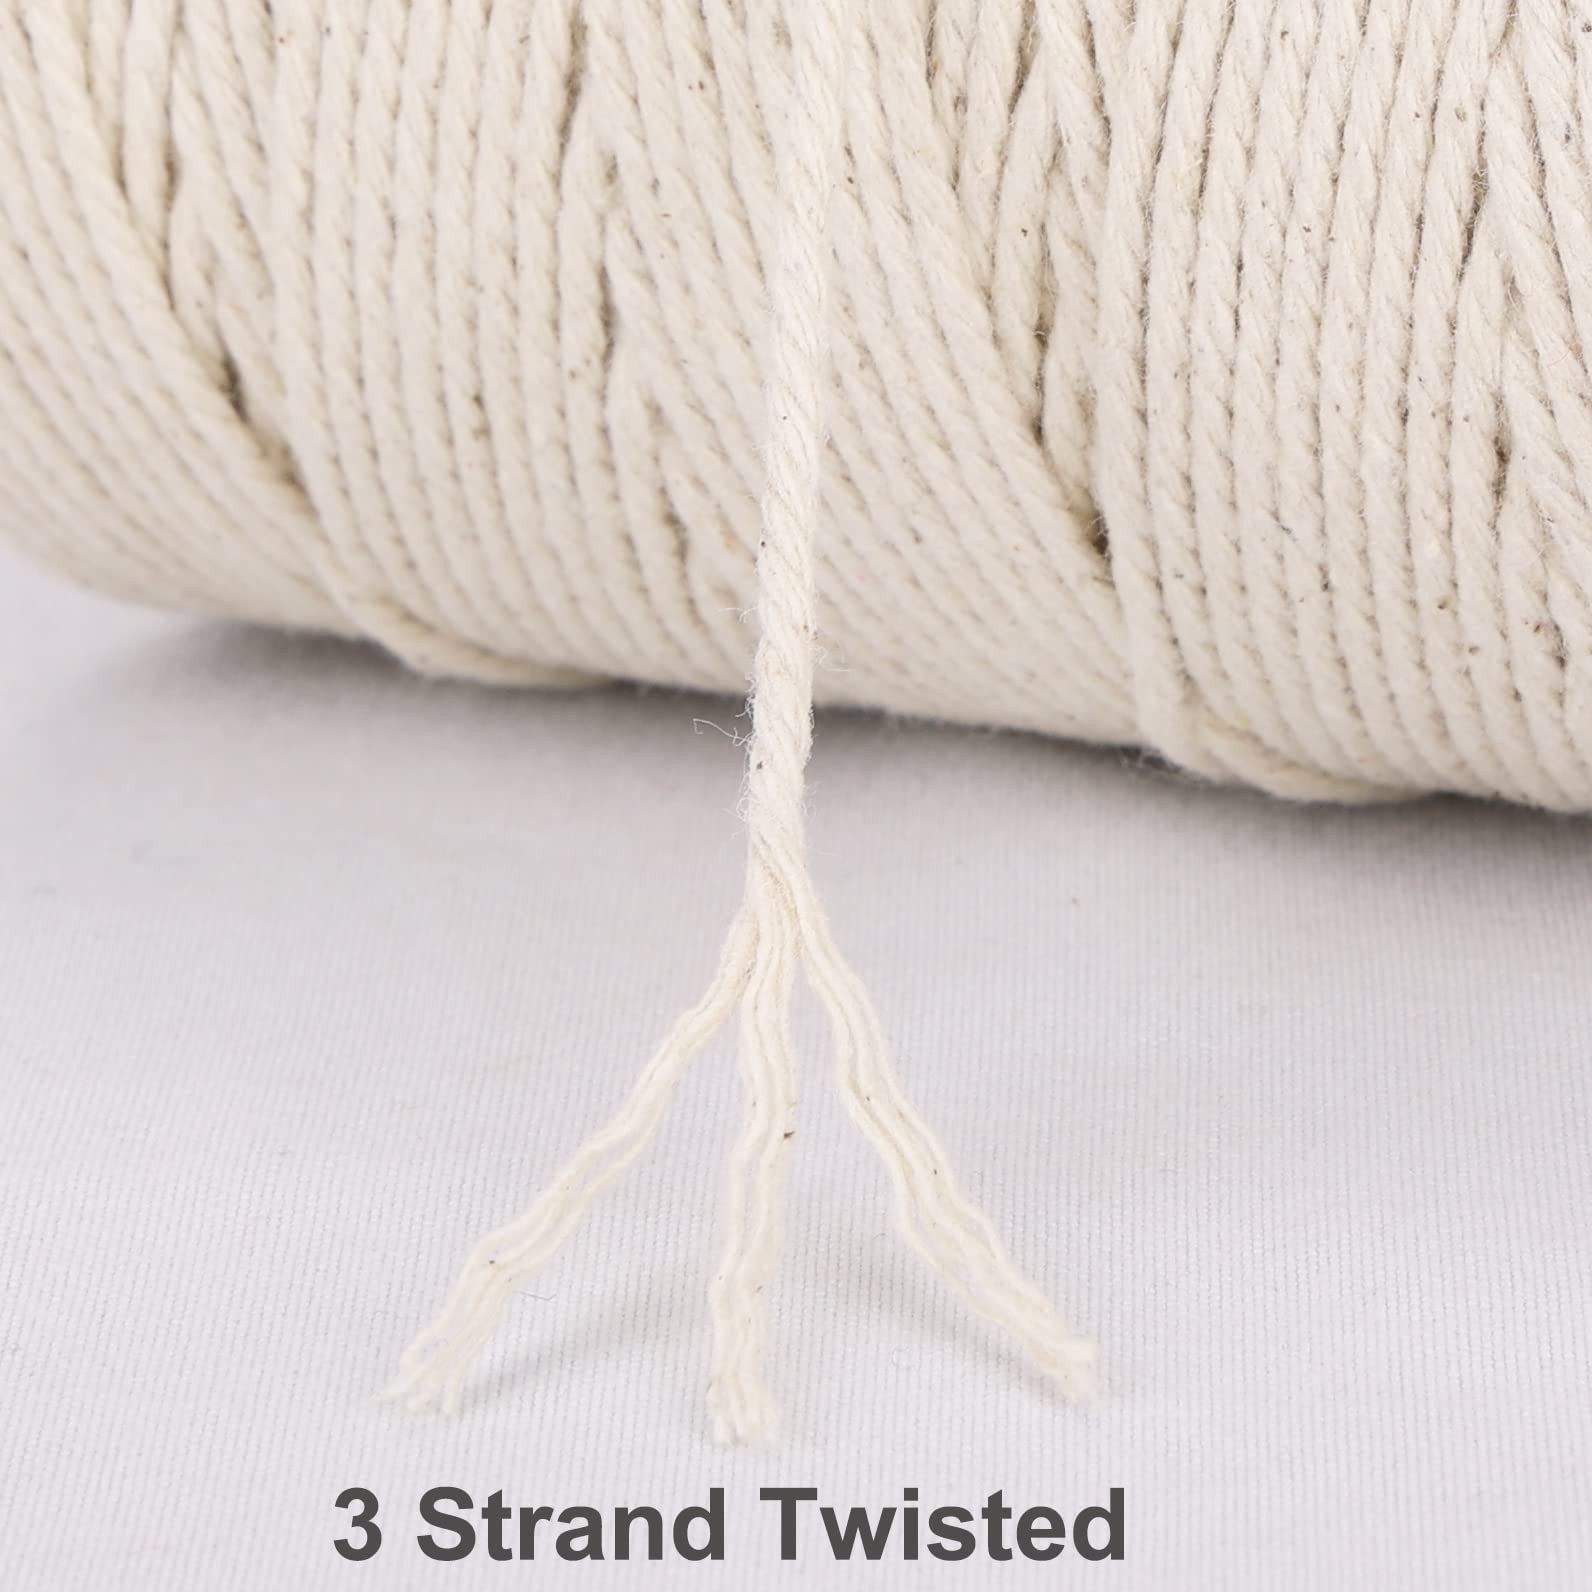 XKDOUS 1035ft Butchers Twine, 100% Cotton Food Safe Cooking Twine Kitchen Twine  String, 2mm Natural White Butcher Twine for Meat and Roasting, Trussing  Poultry, Bakes Twine & Crafting 